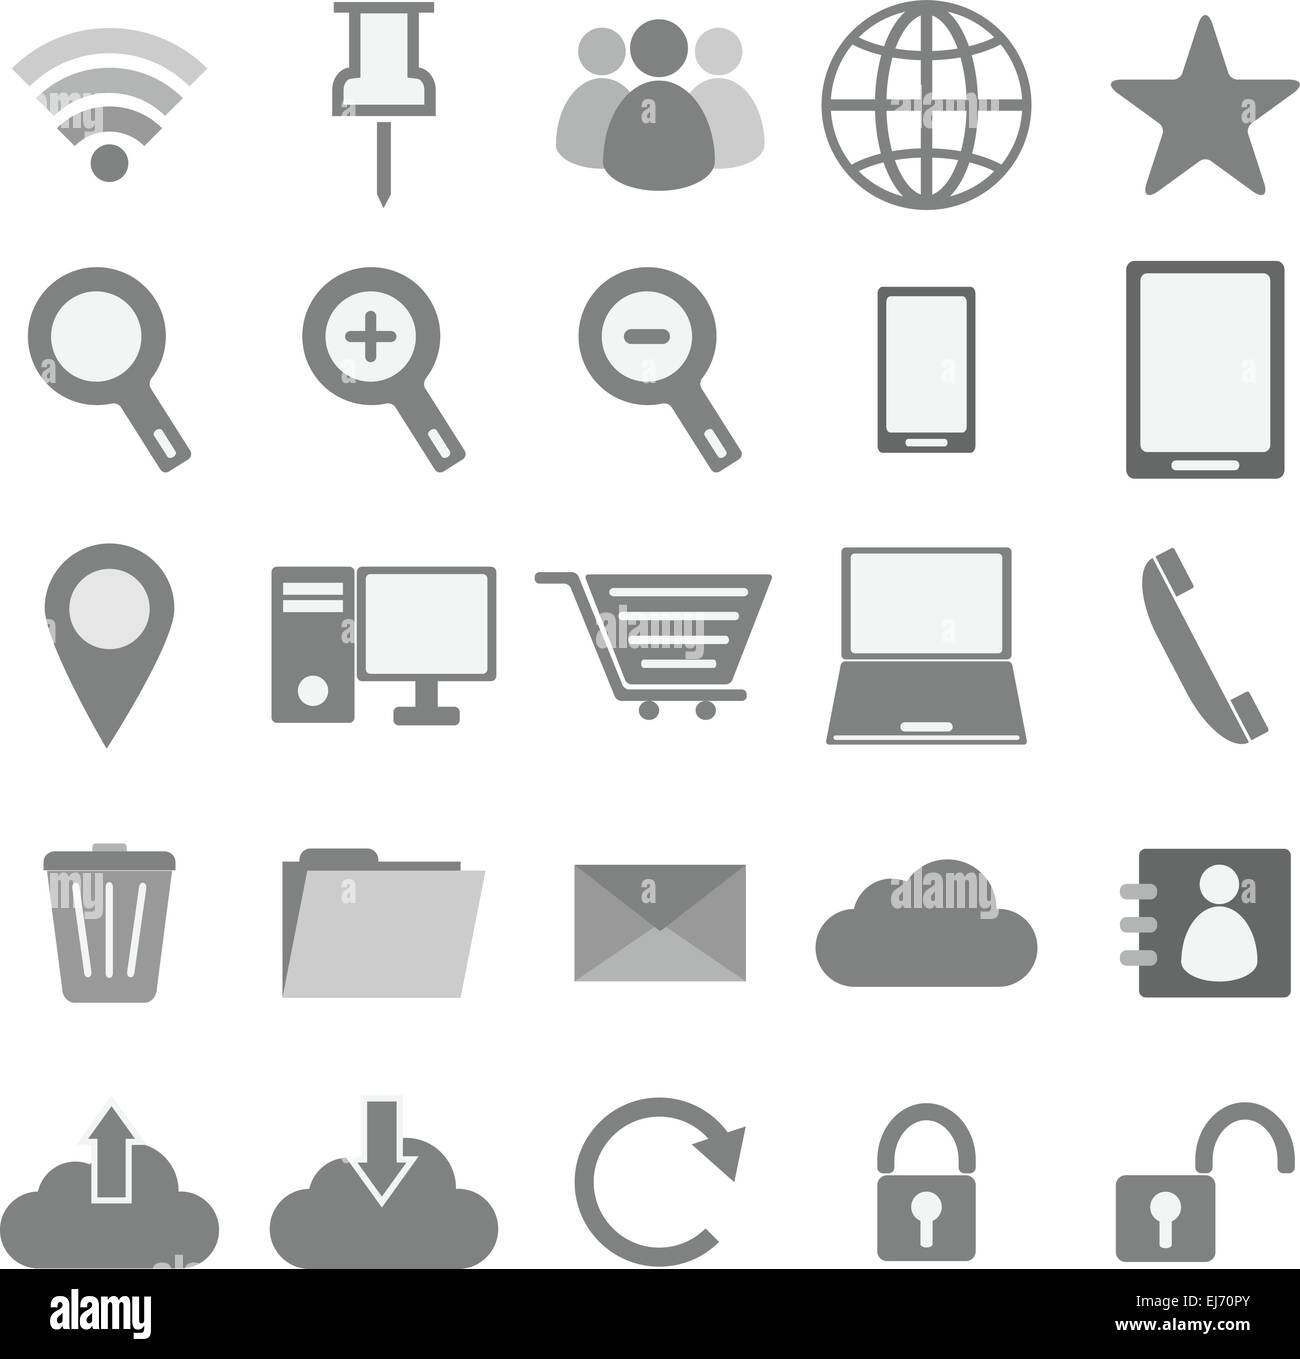 Internet icons on white background, stock vector Stock Vector